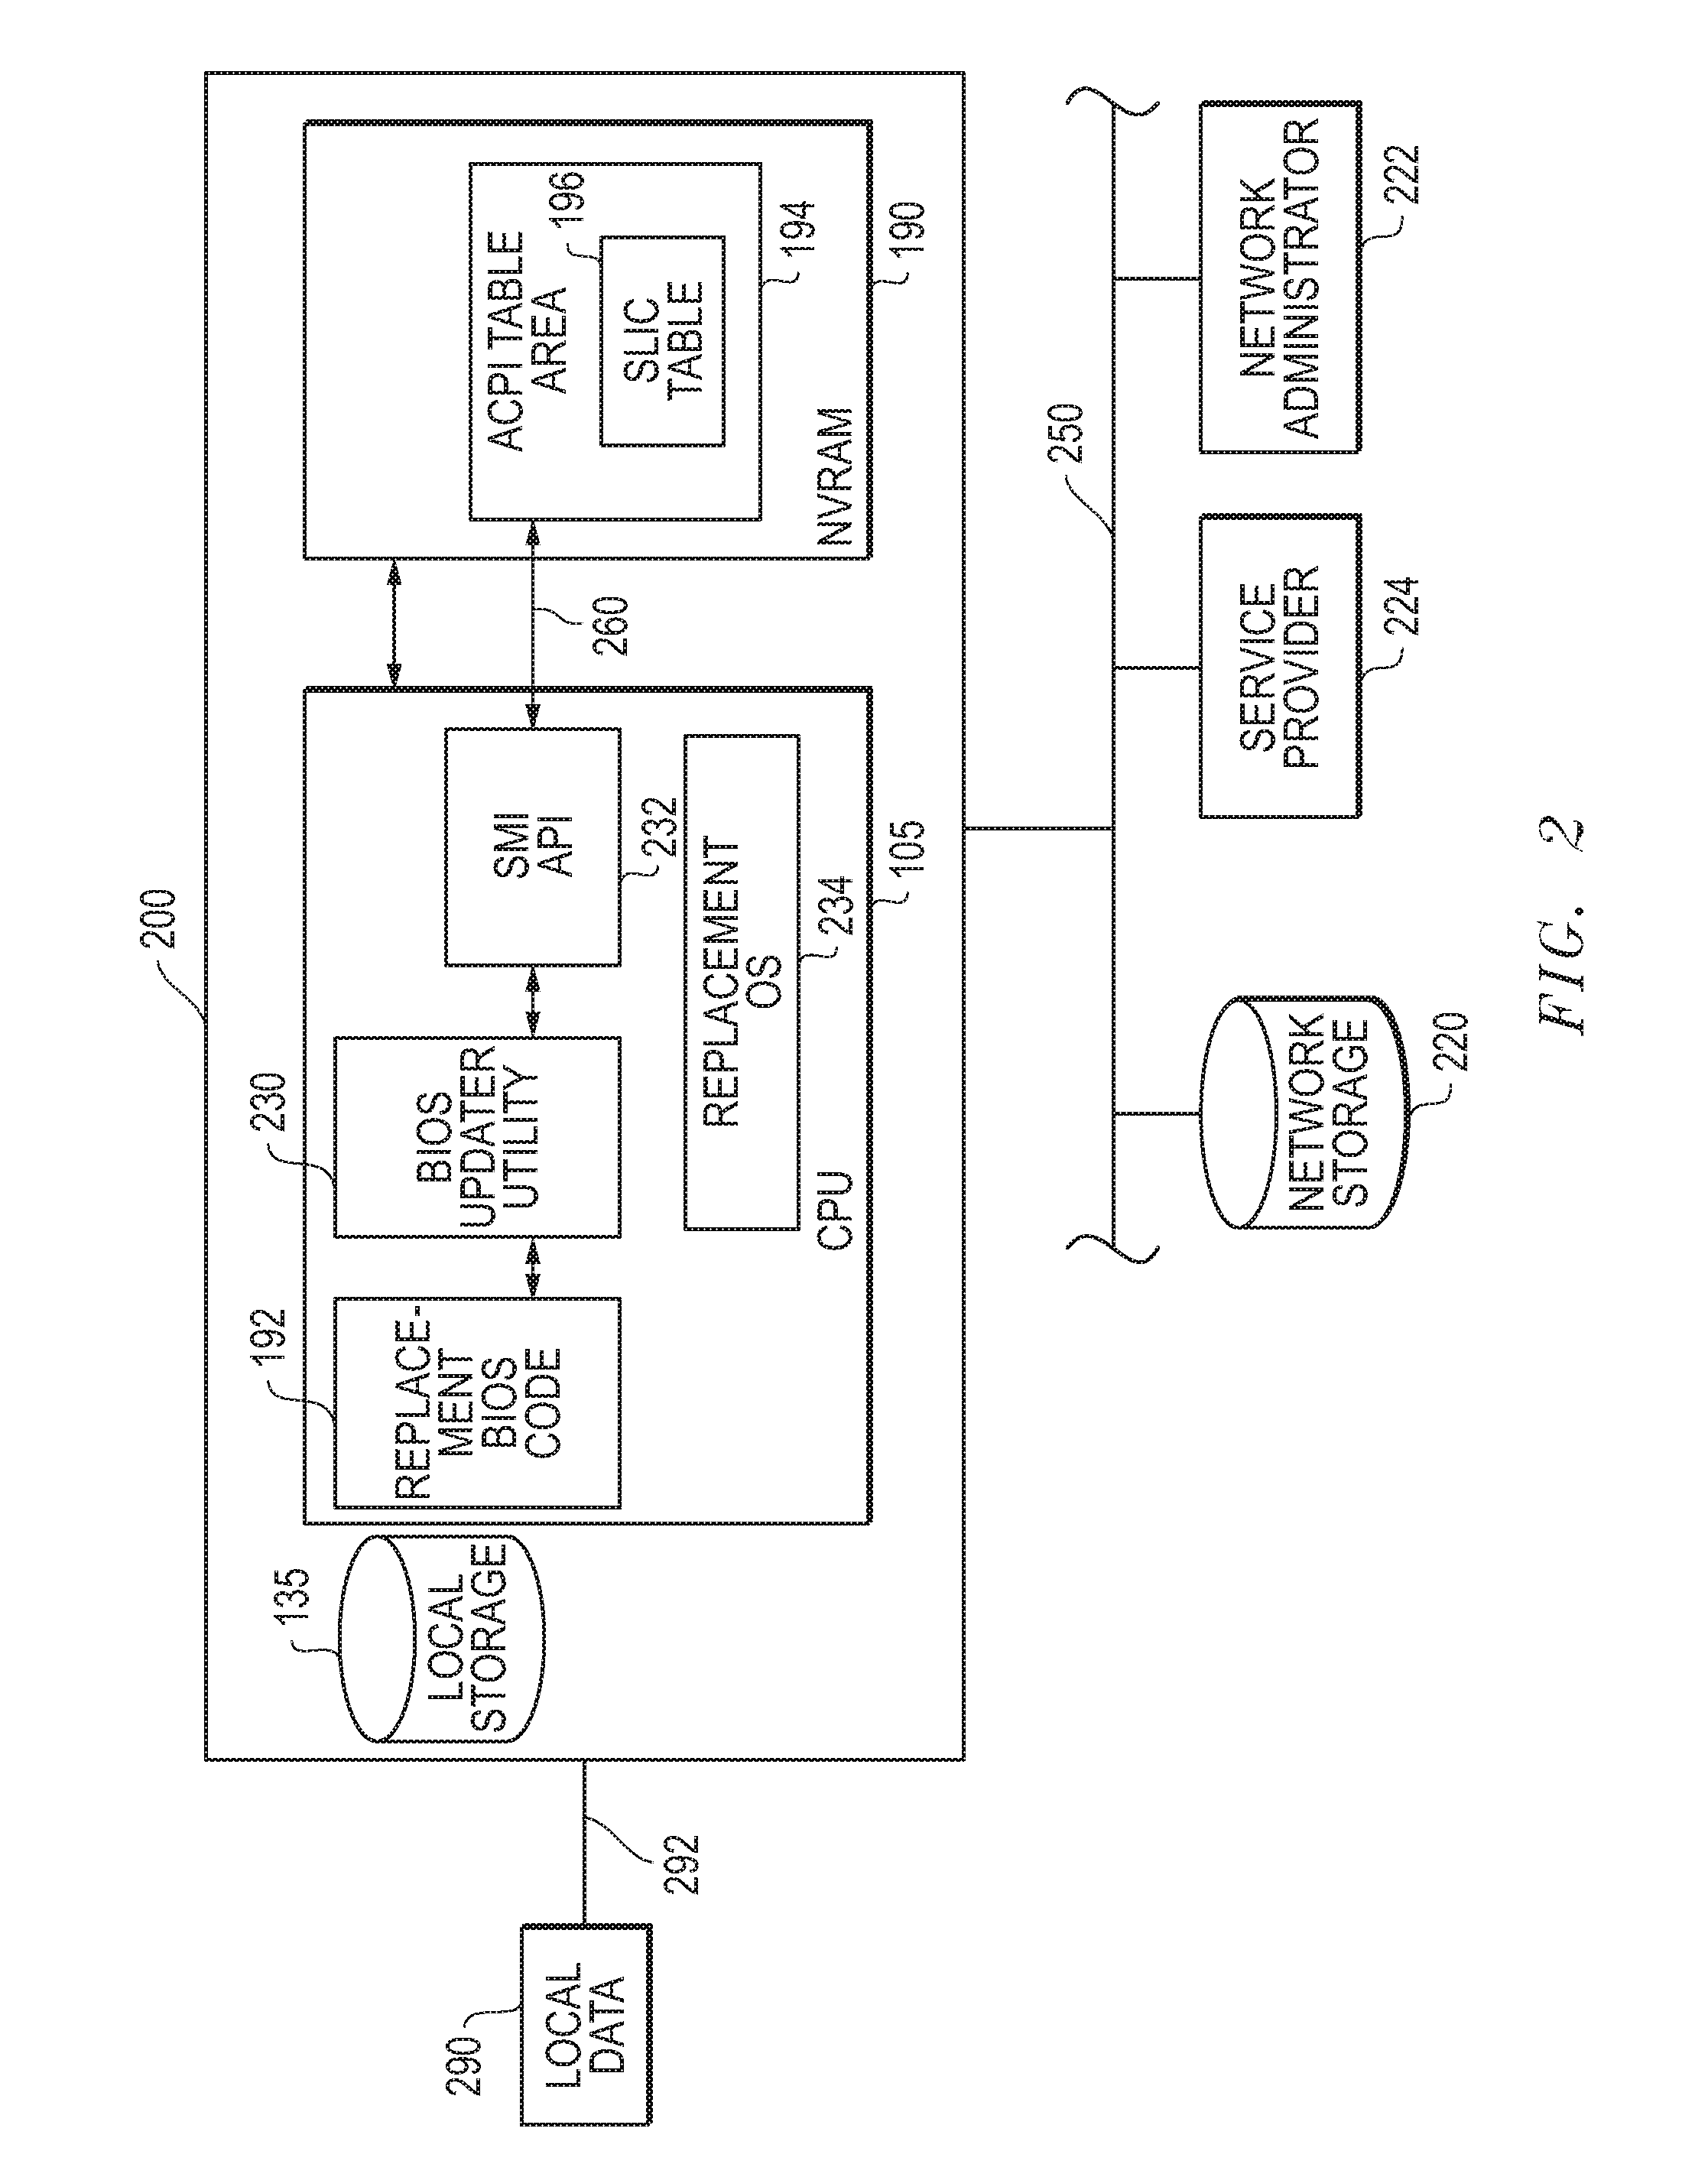 Systems and methods for facilitating activation of operating systems